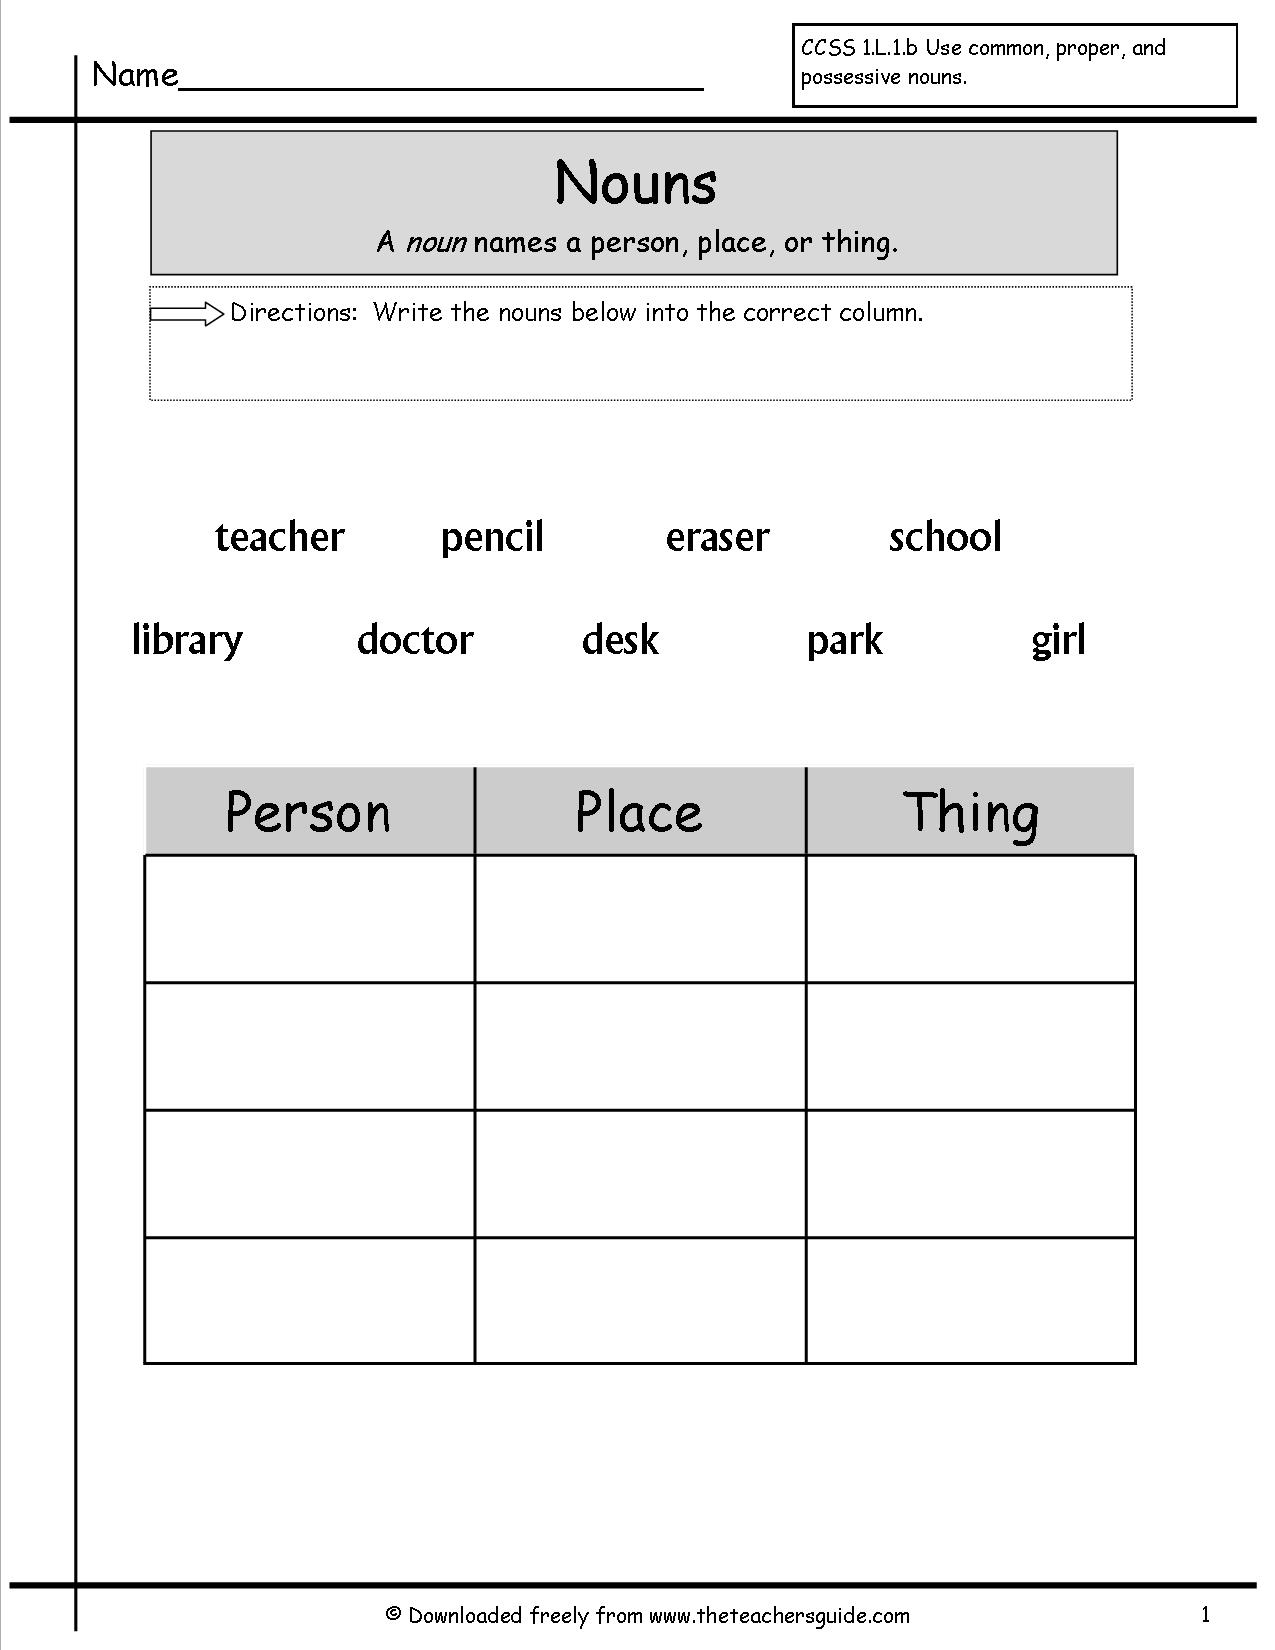 17-best-images-of-different-kinds-of-nouns-worksheet-different-types-common-and-proper-nouns